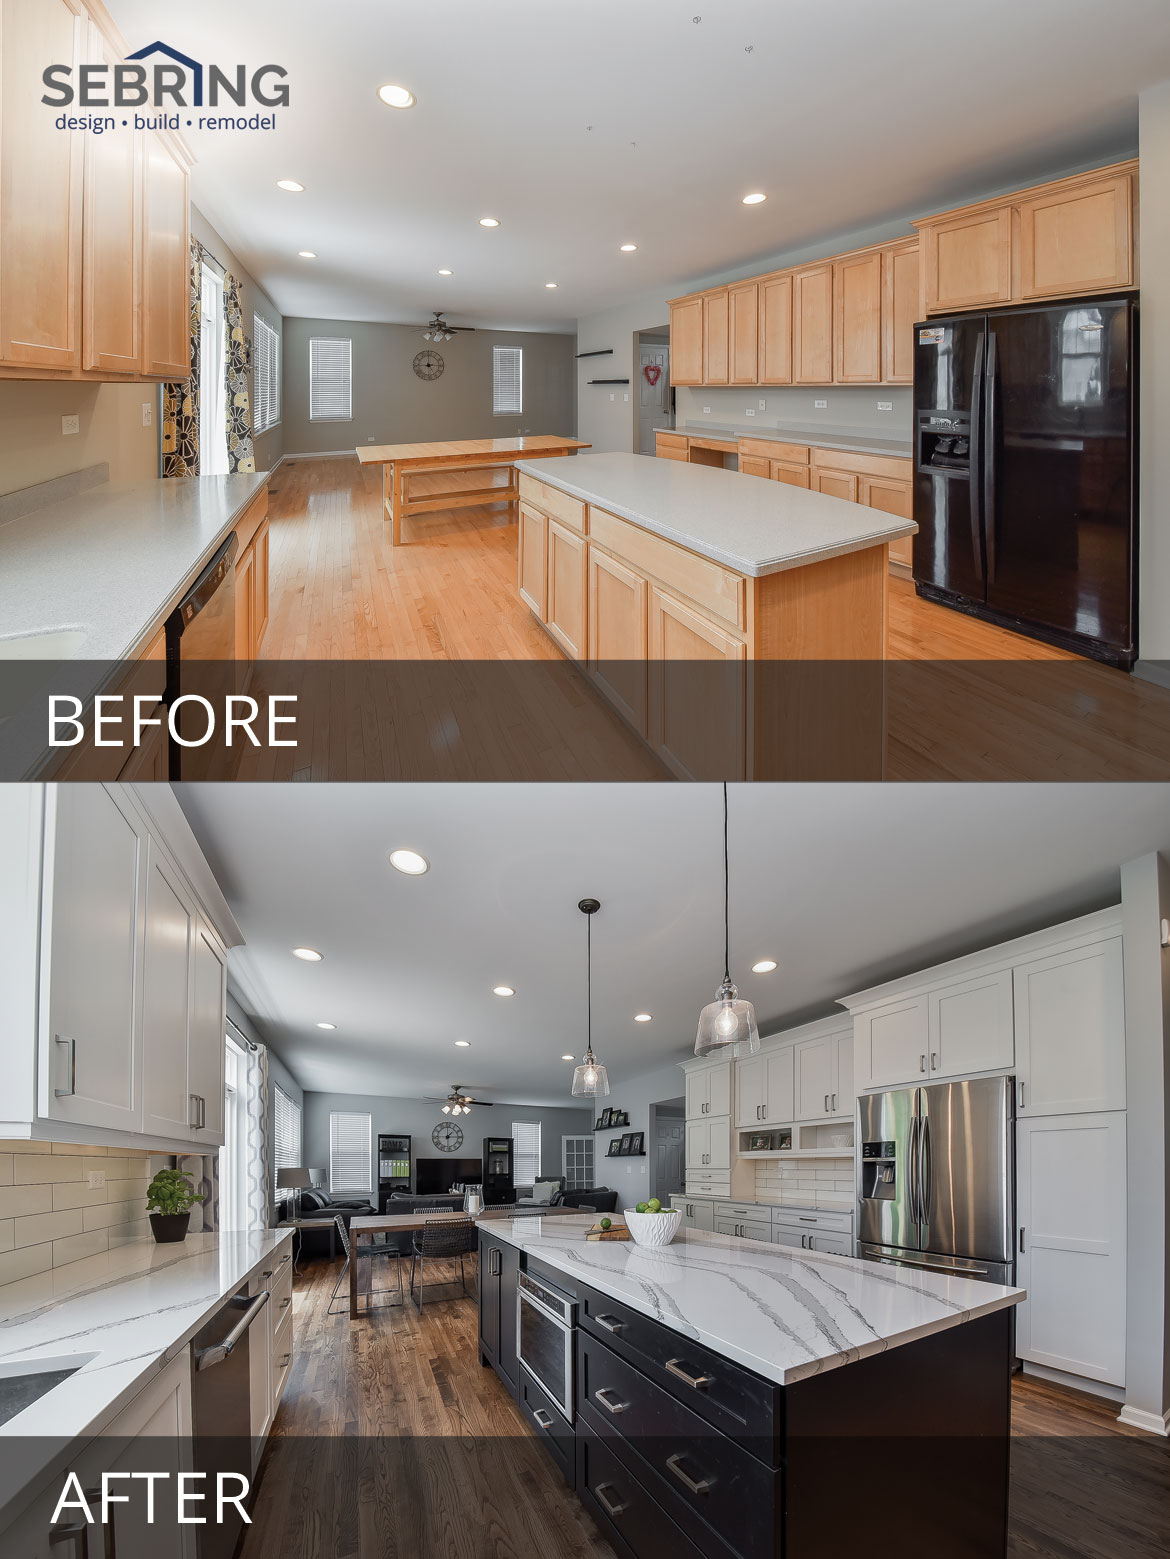 Pete & Mary's Kitchen Before & After Pictures | Home Remodeling Contractors | Sebring Design Build